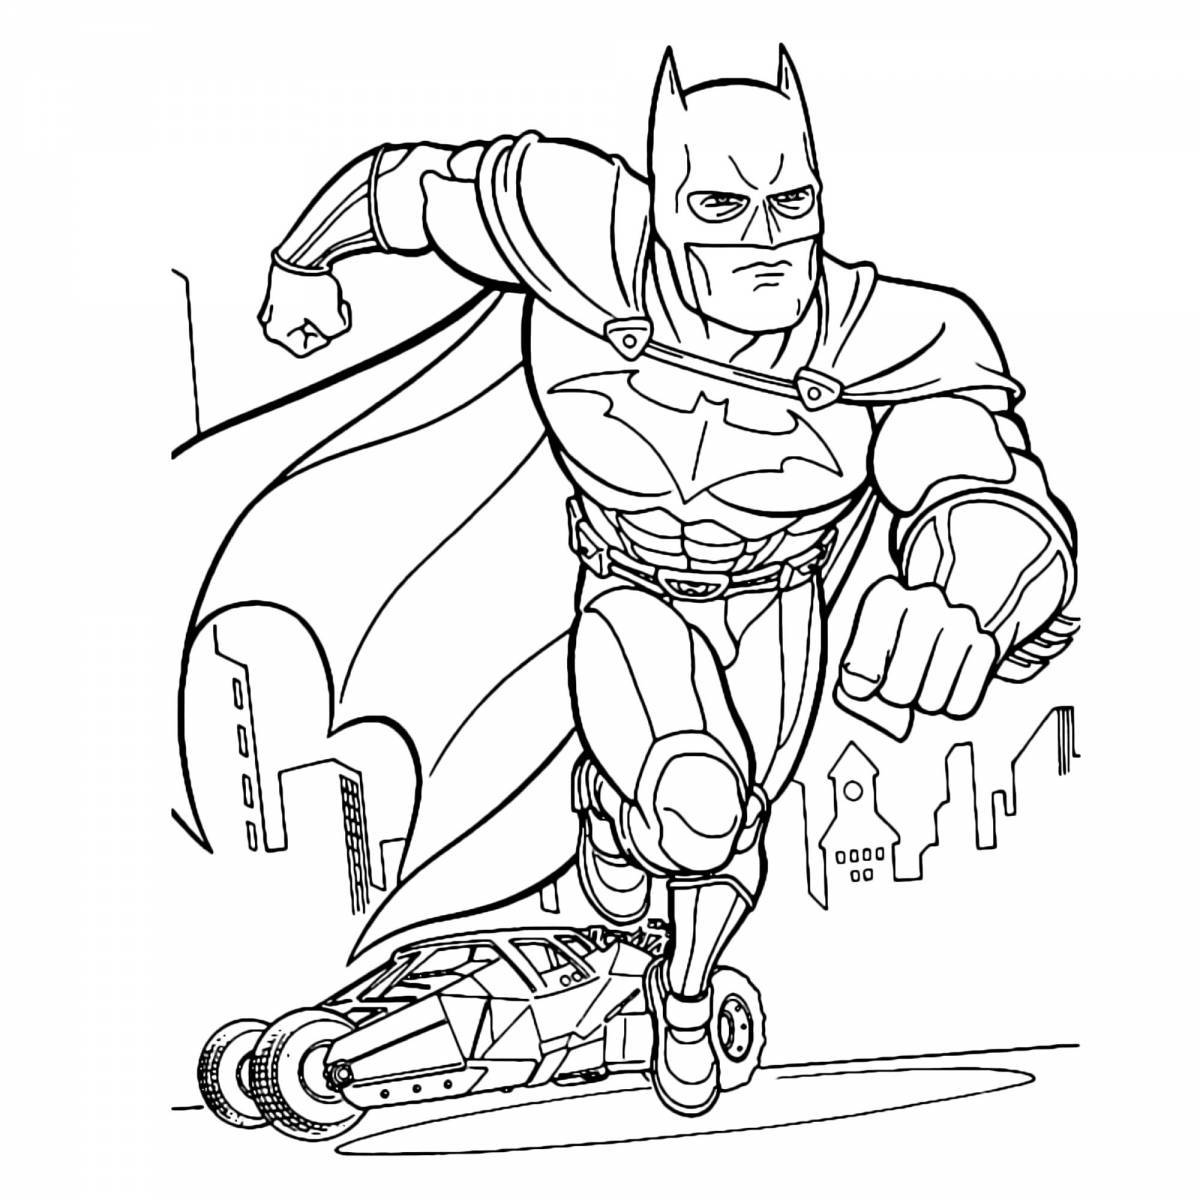 Wonderful superhero coloring pages for boys